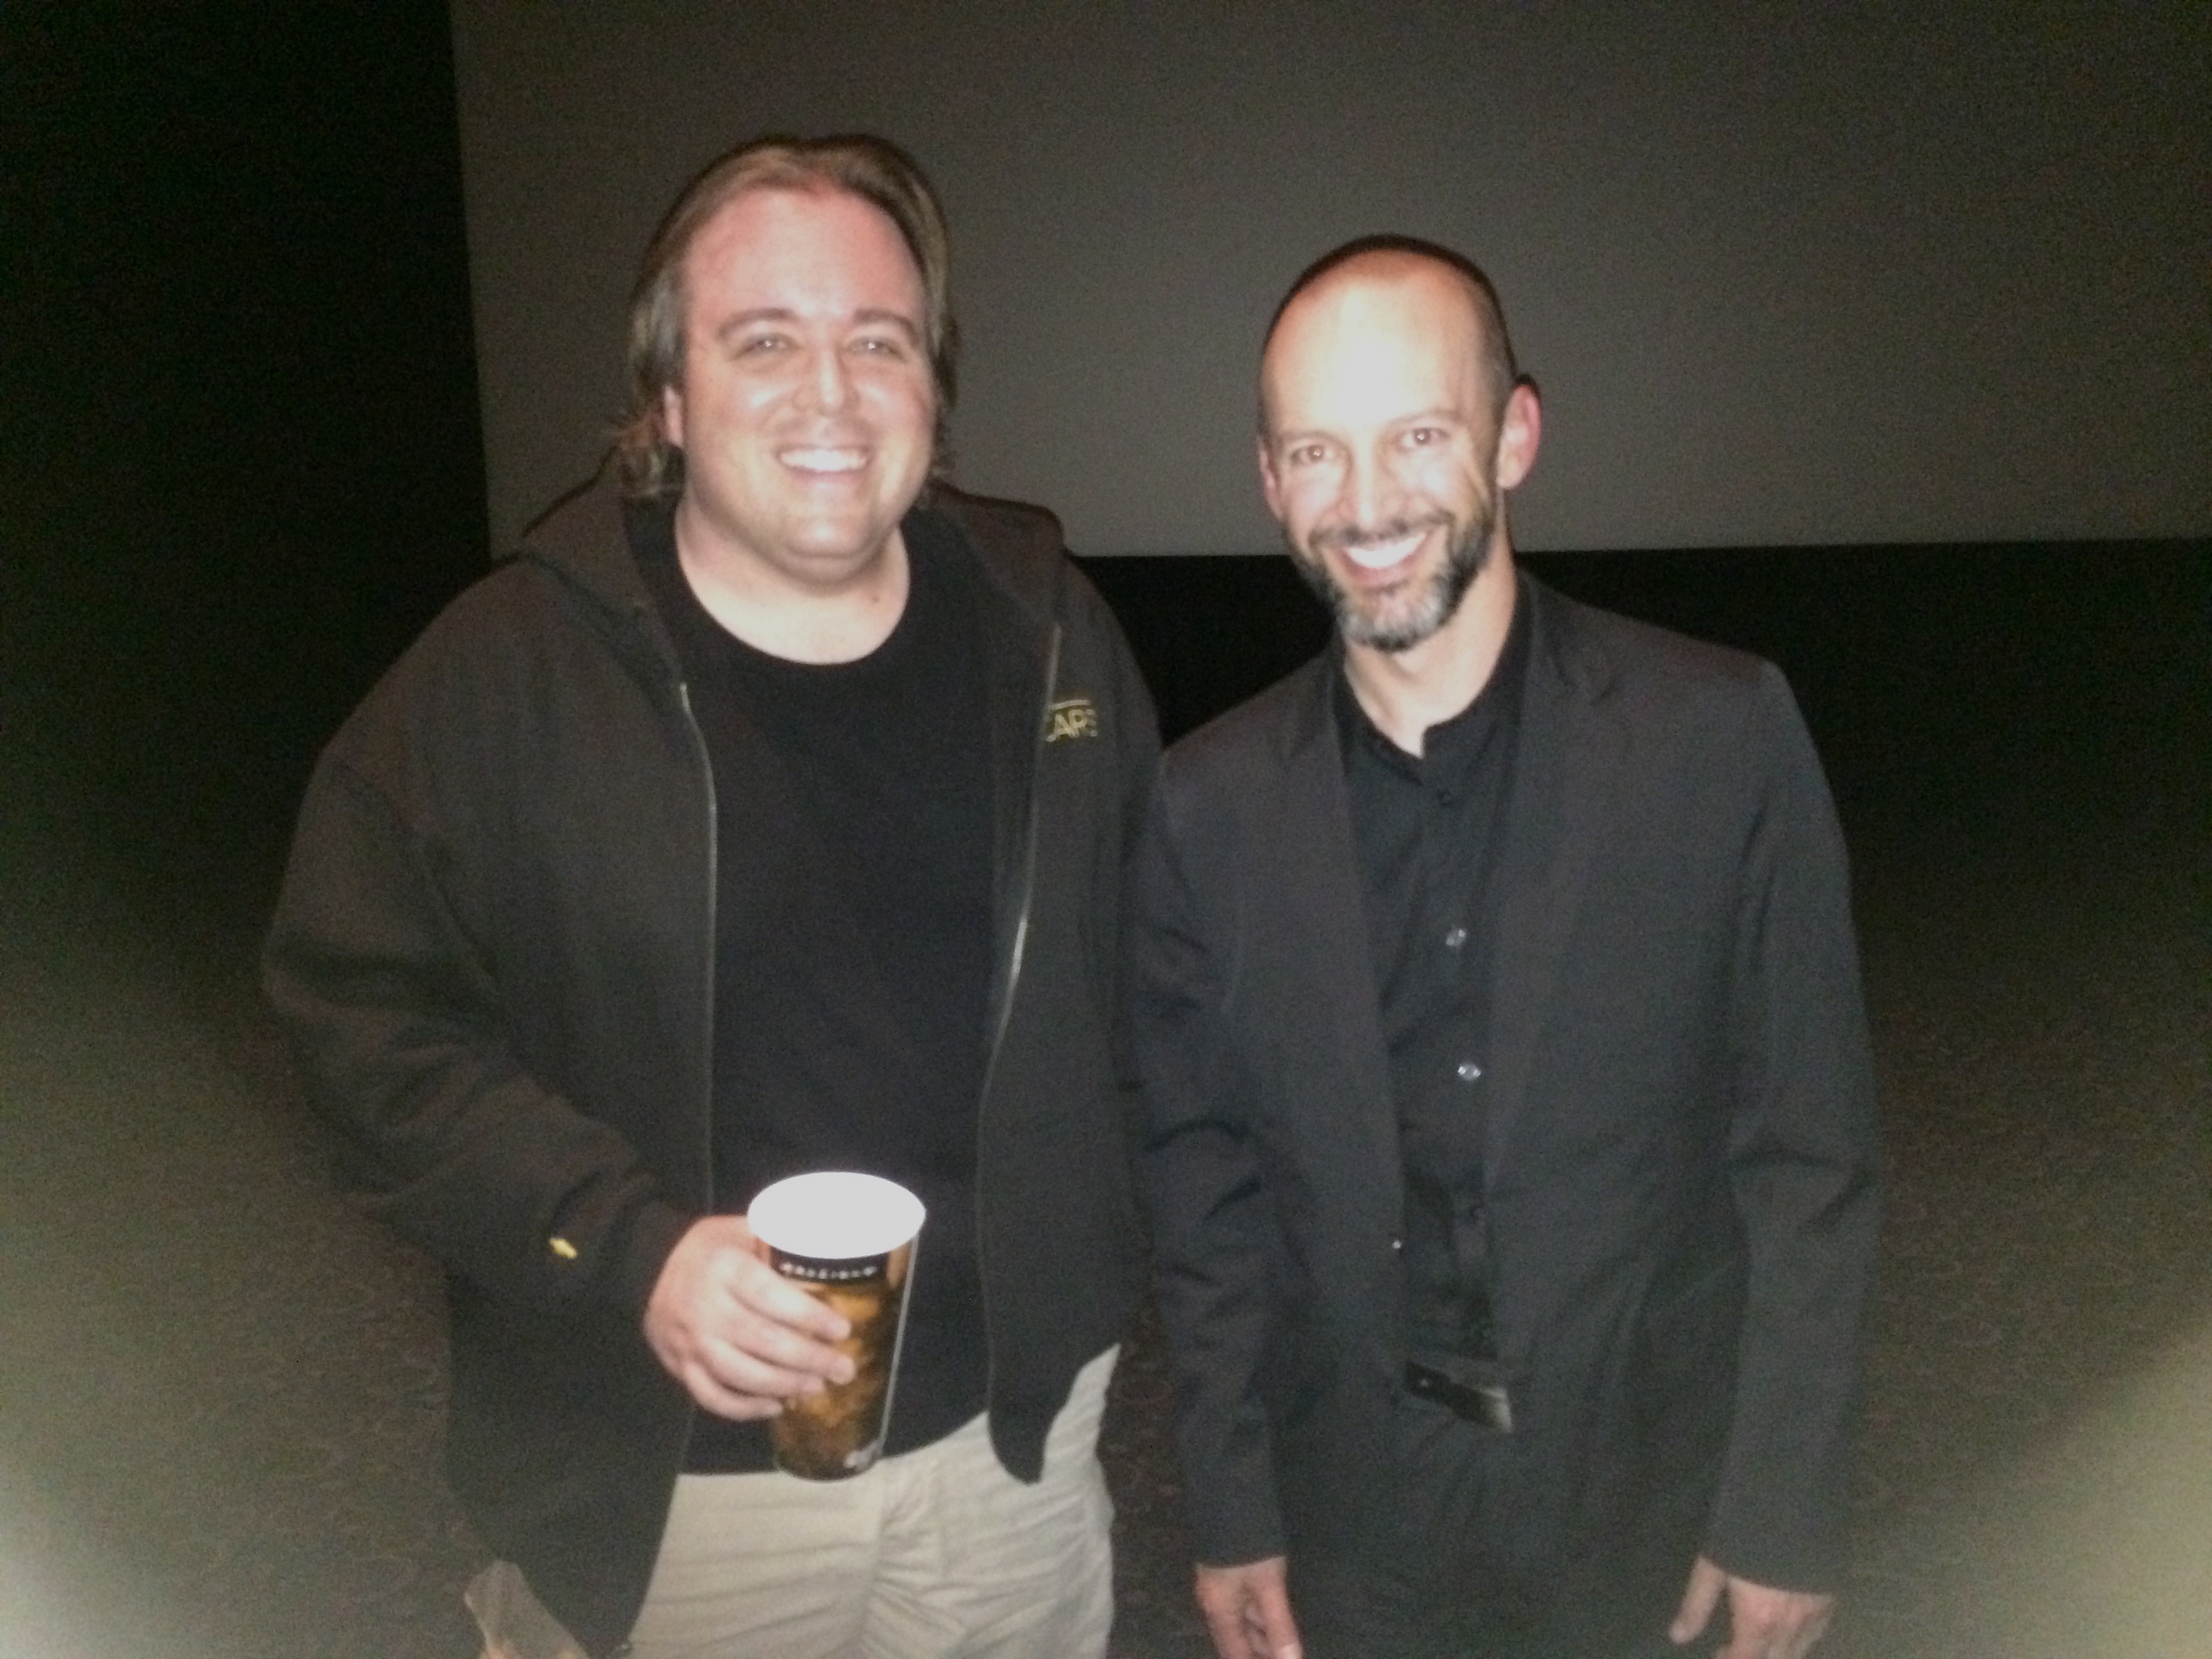 With J.P. Manoux at the 10th anniversary EUROTRIP reunion screening.